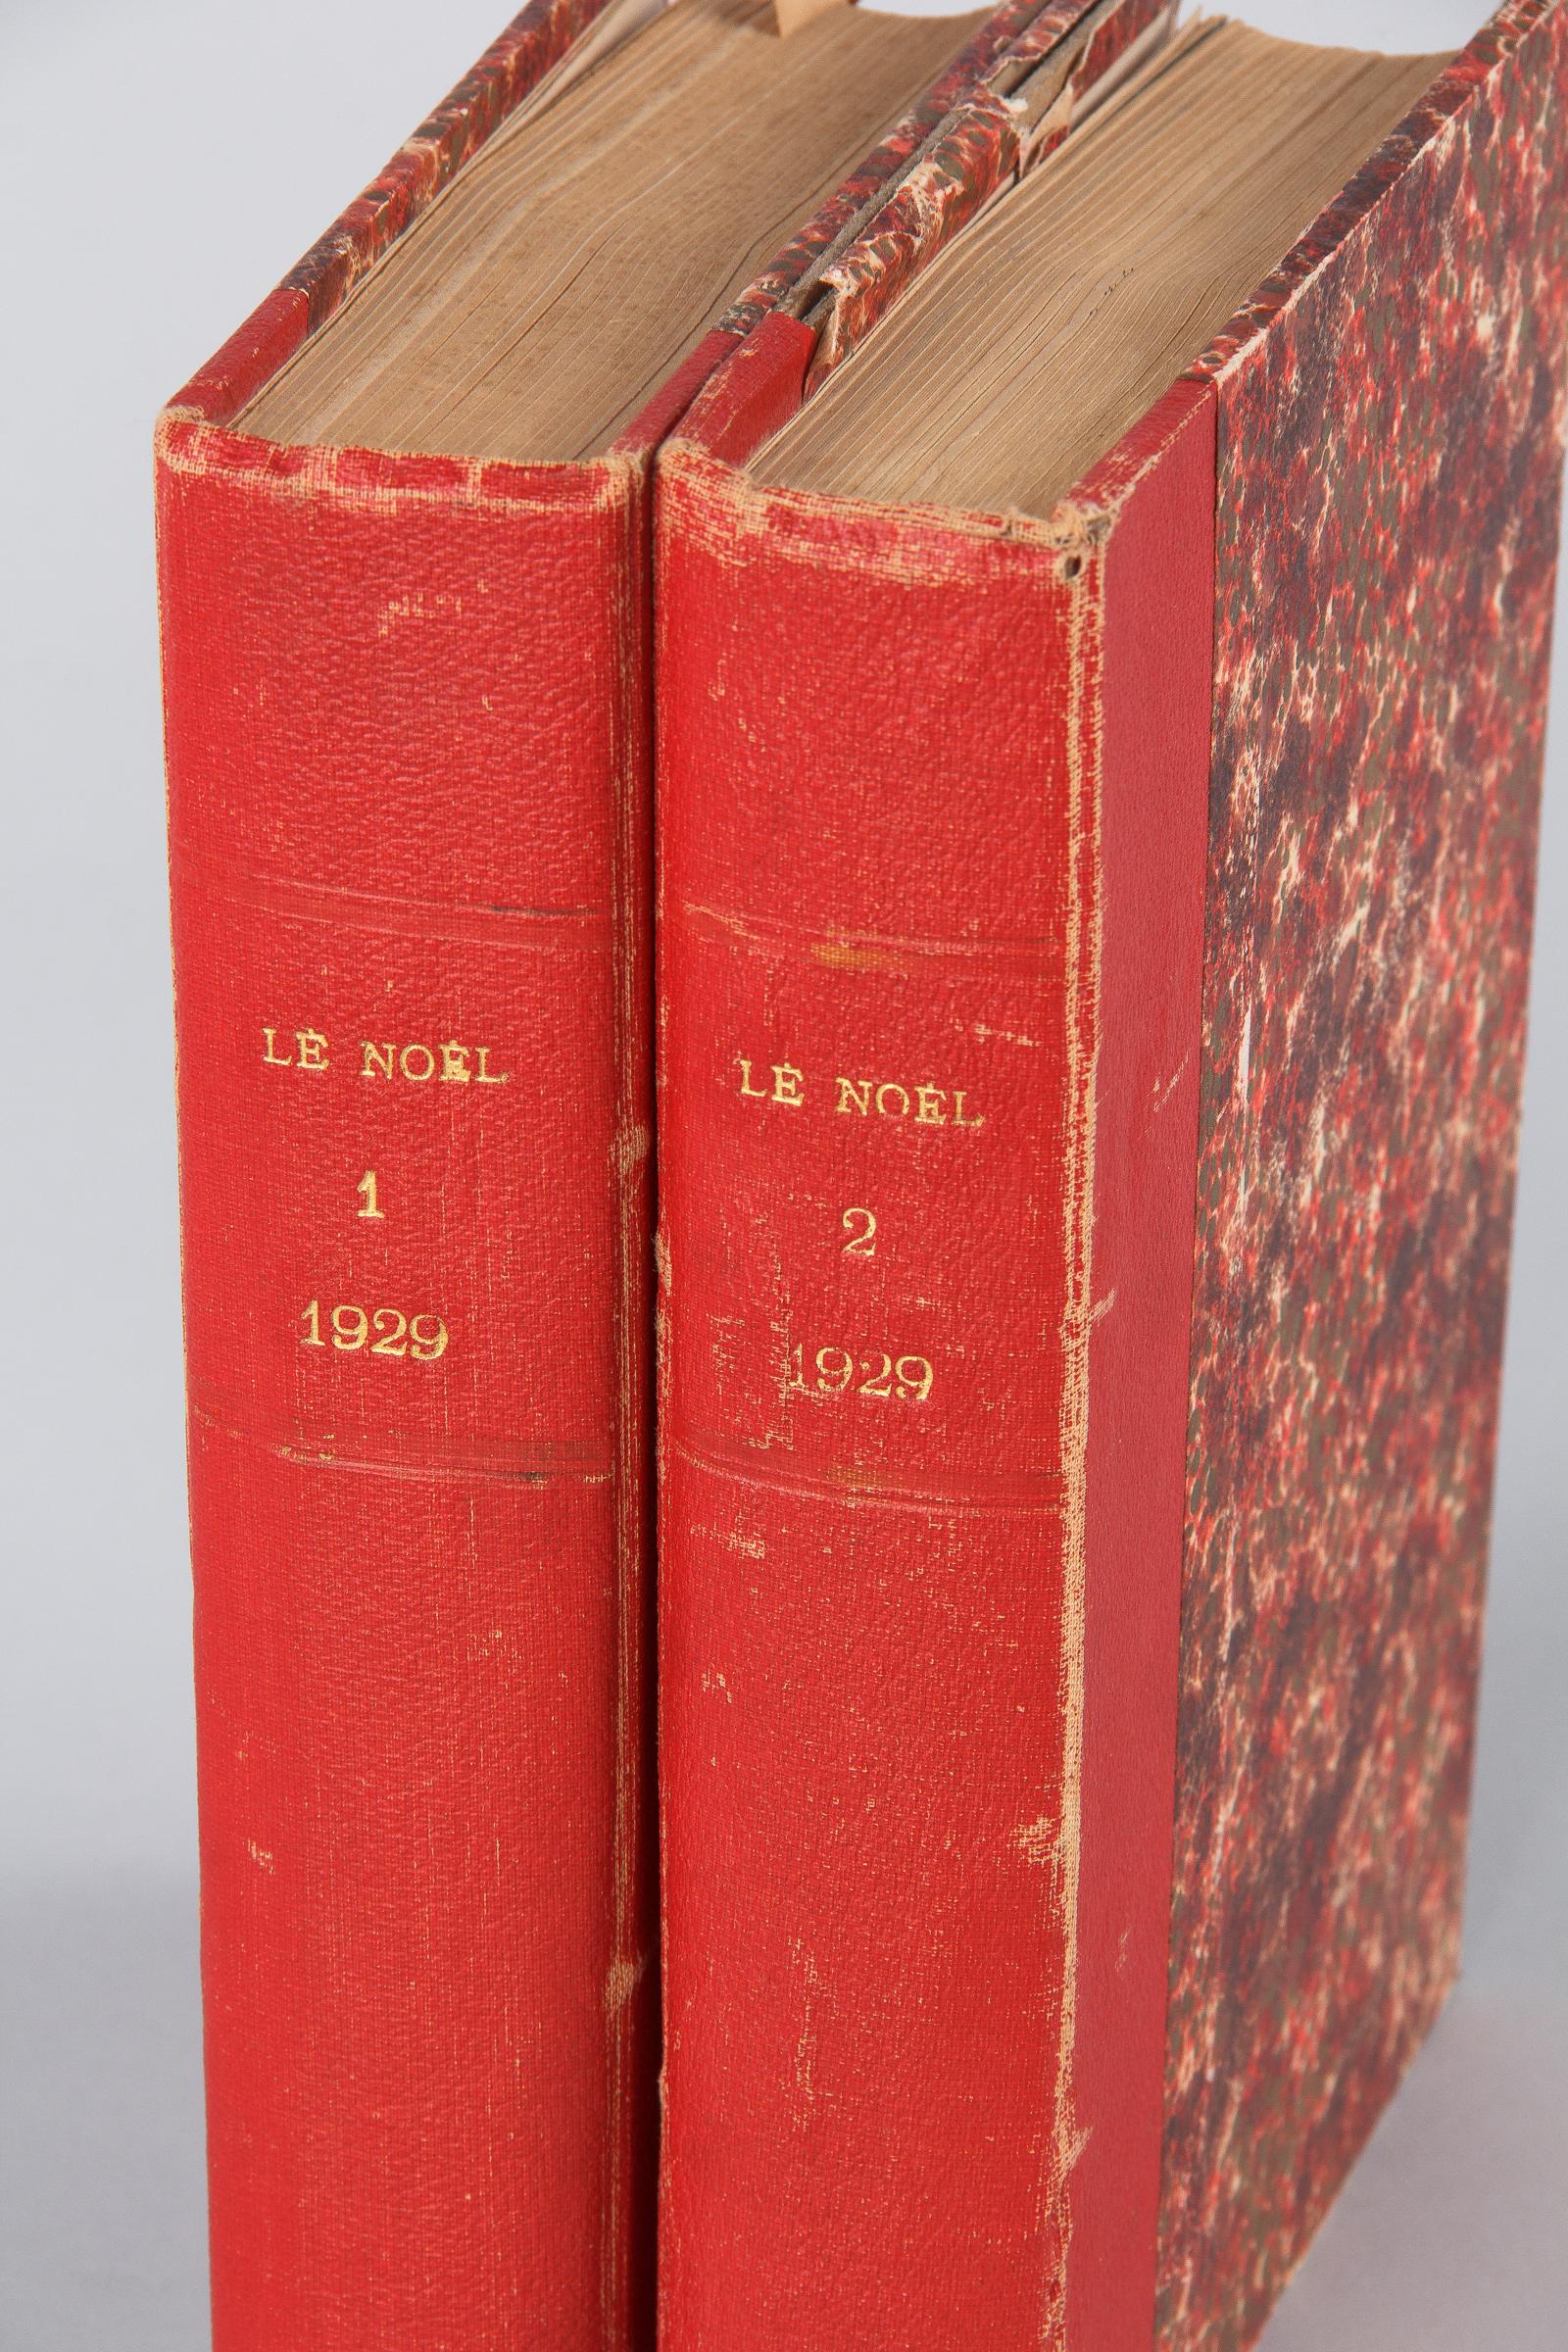 Le Noel was a French weekly publication in the early 1900s published by Maison de la Bonne Presse, Paris. It was featuring subjects on religion, literature, arts and music destined for young women. This 2 volumes complied the year 1929. Hard bound